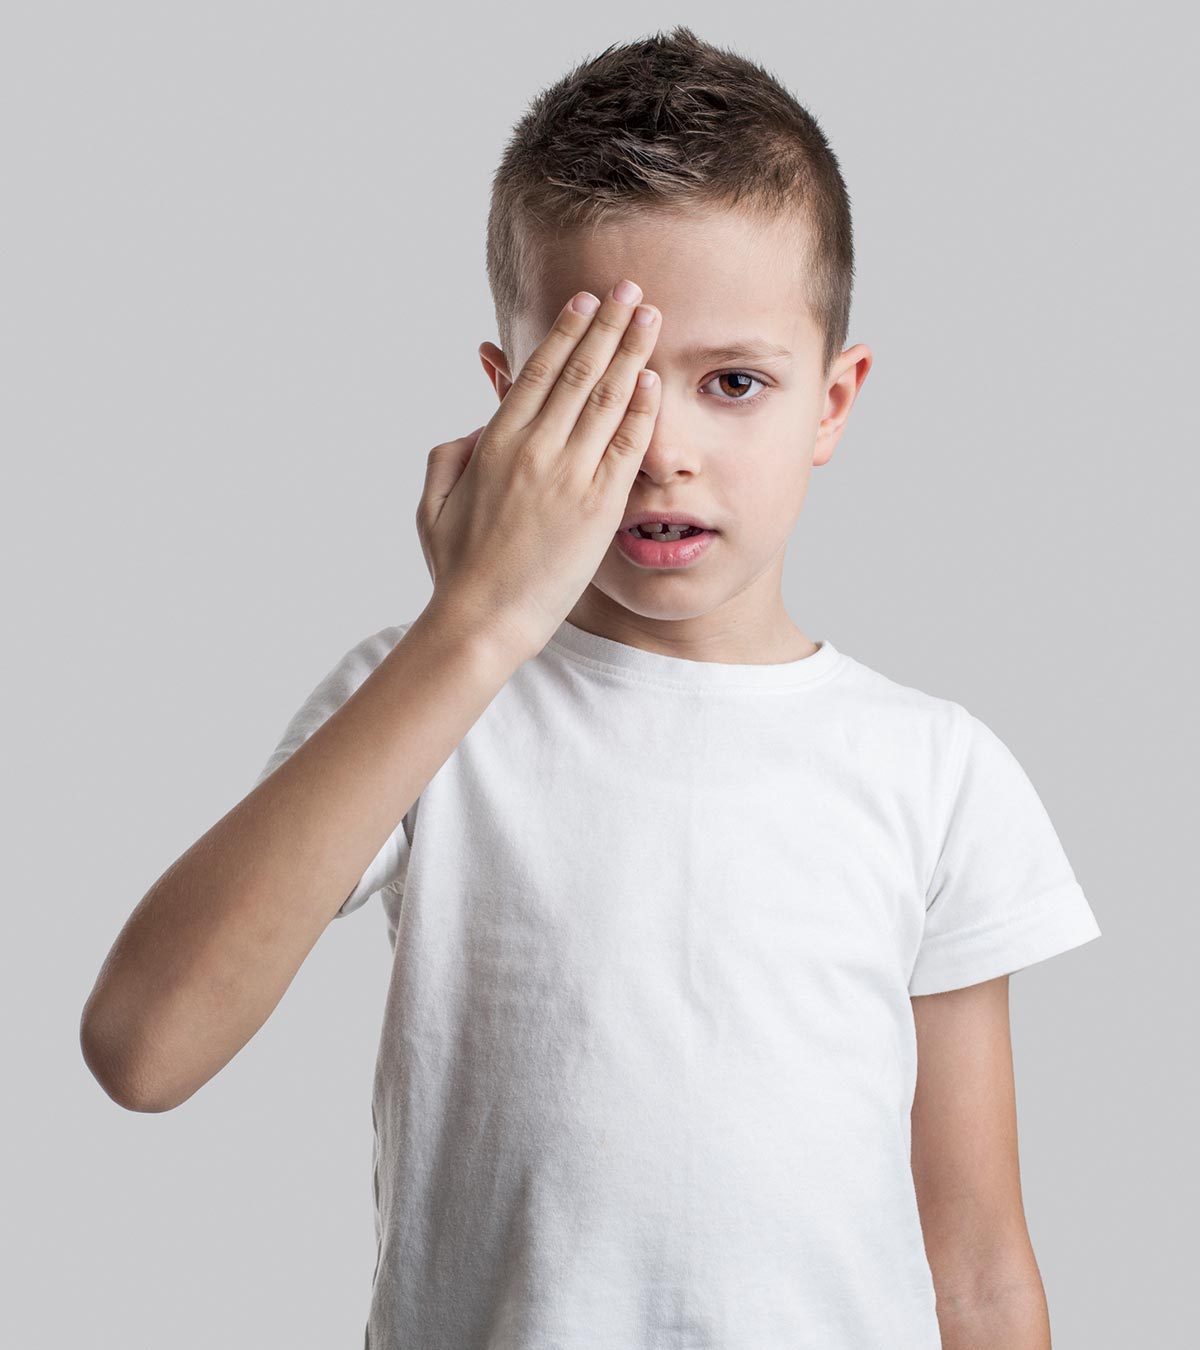 Tics In Children: What They Are, Symptoms & Treatment